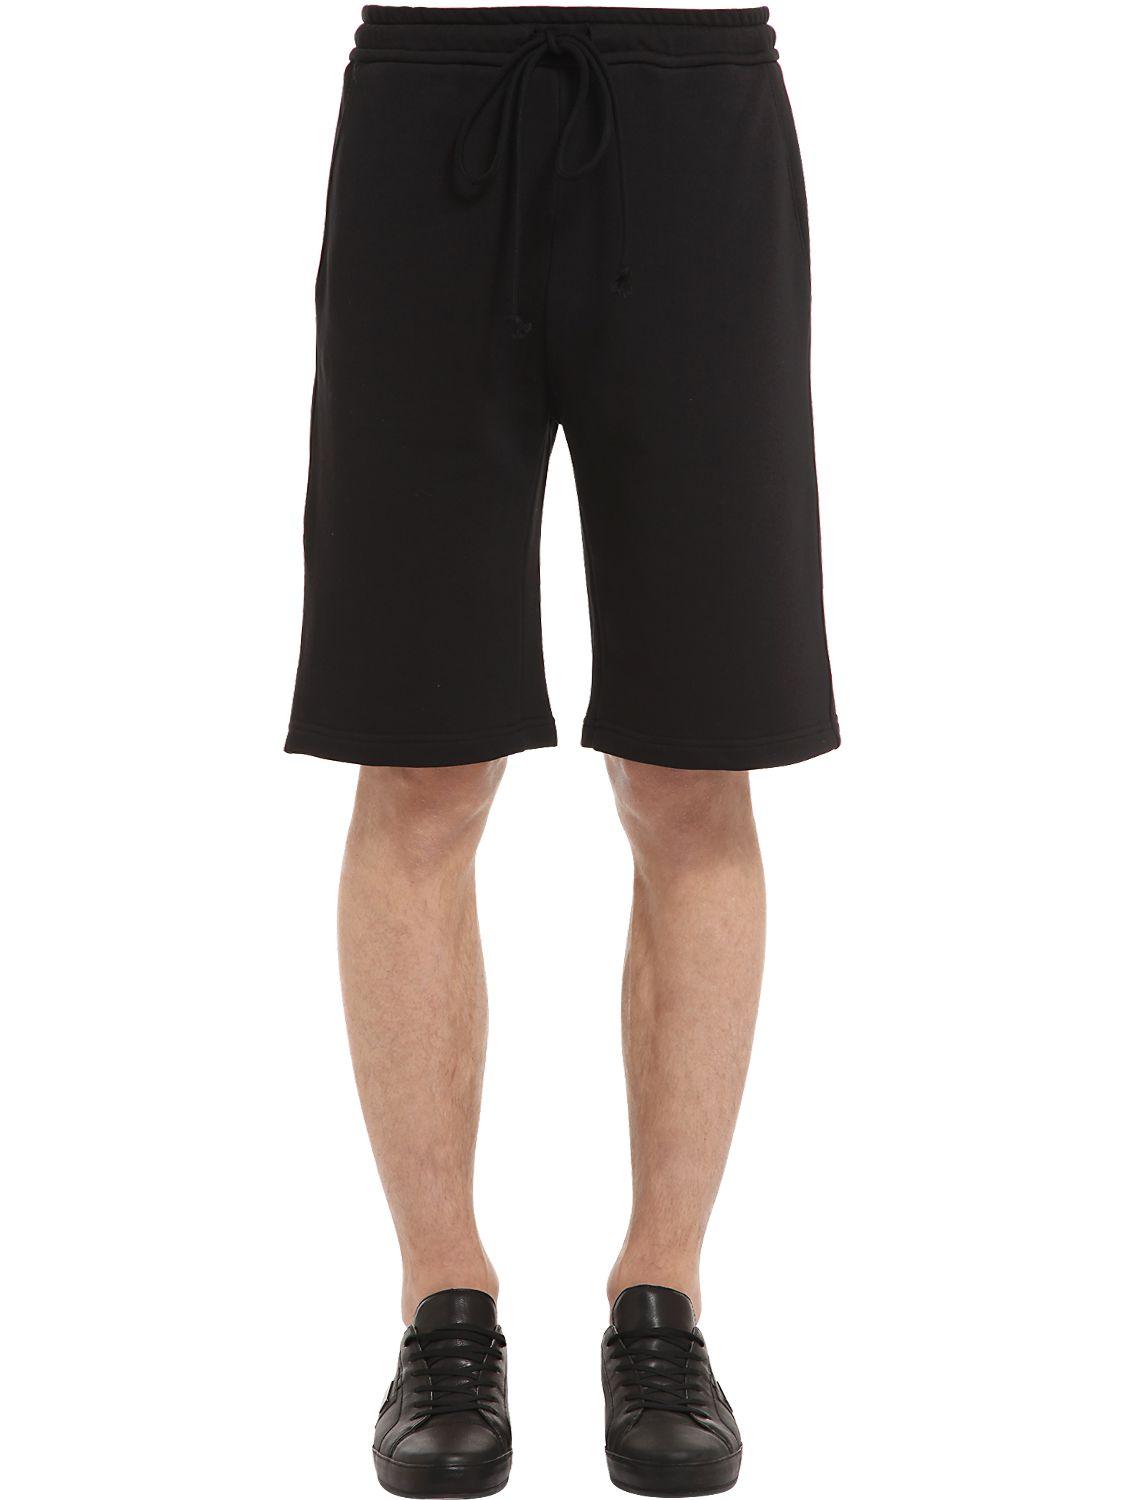 Raf Simons Cotton Sweat Shorts in Black for Men - Lyst